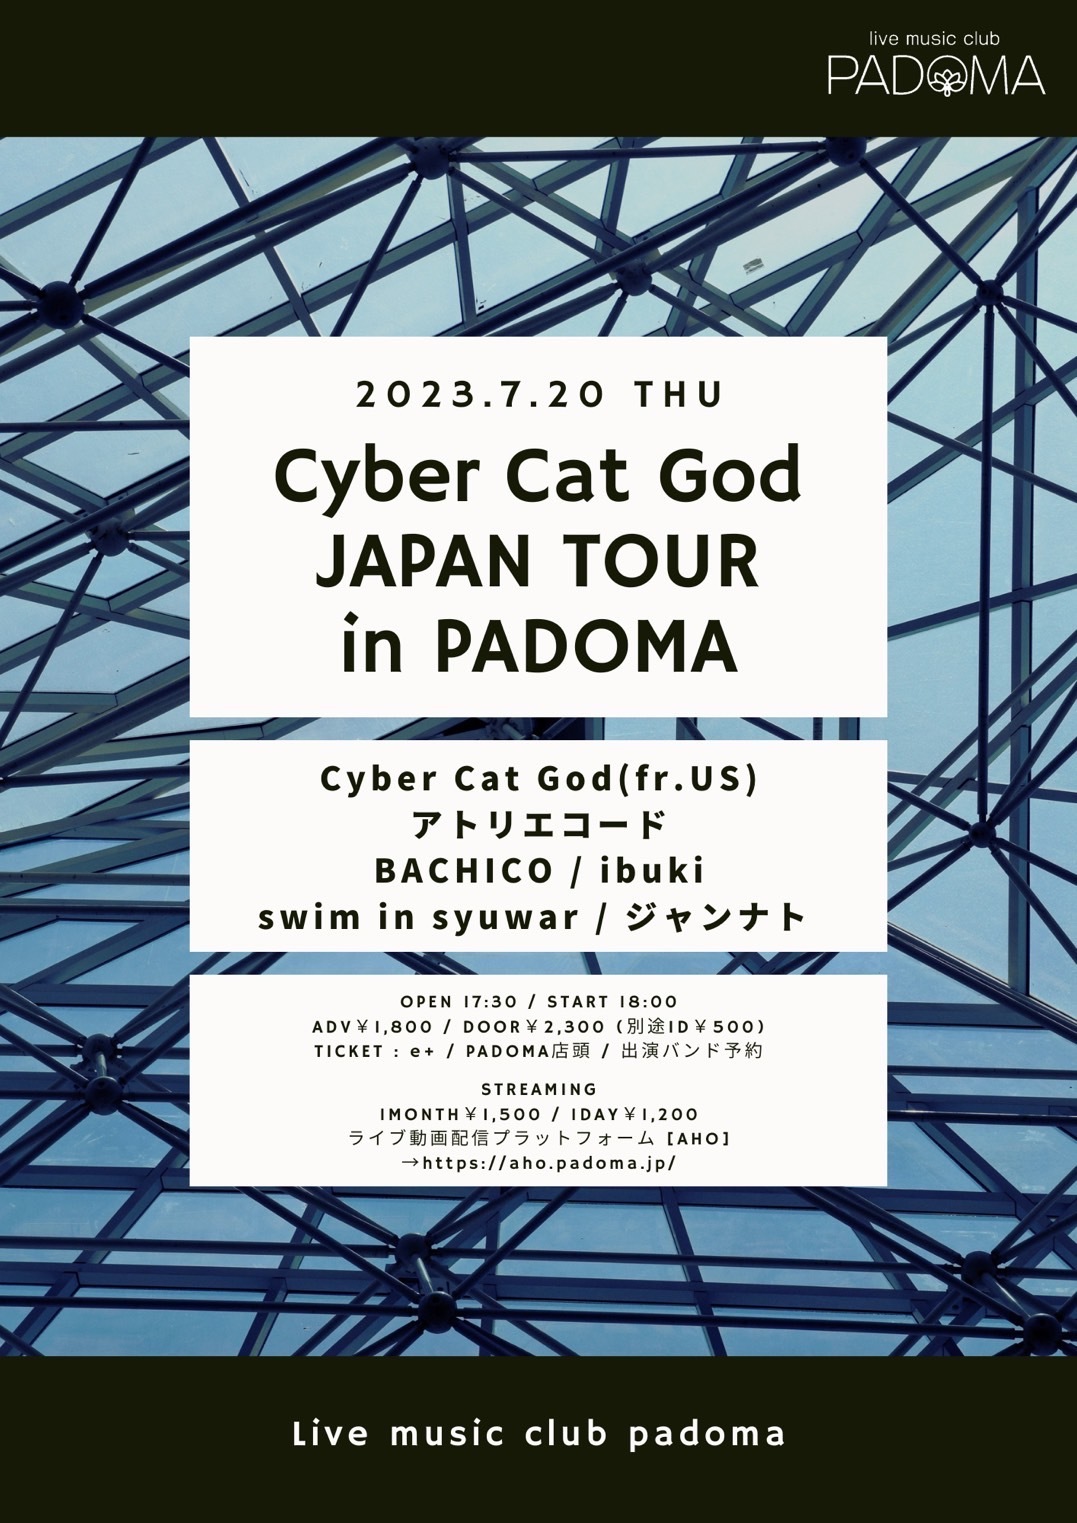 “Cyber Cat God JAPAN TOUR in PADOMA”